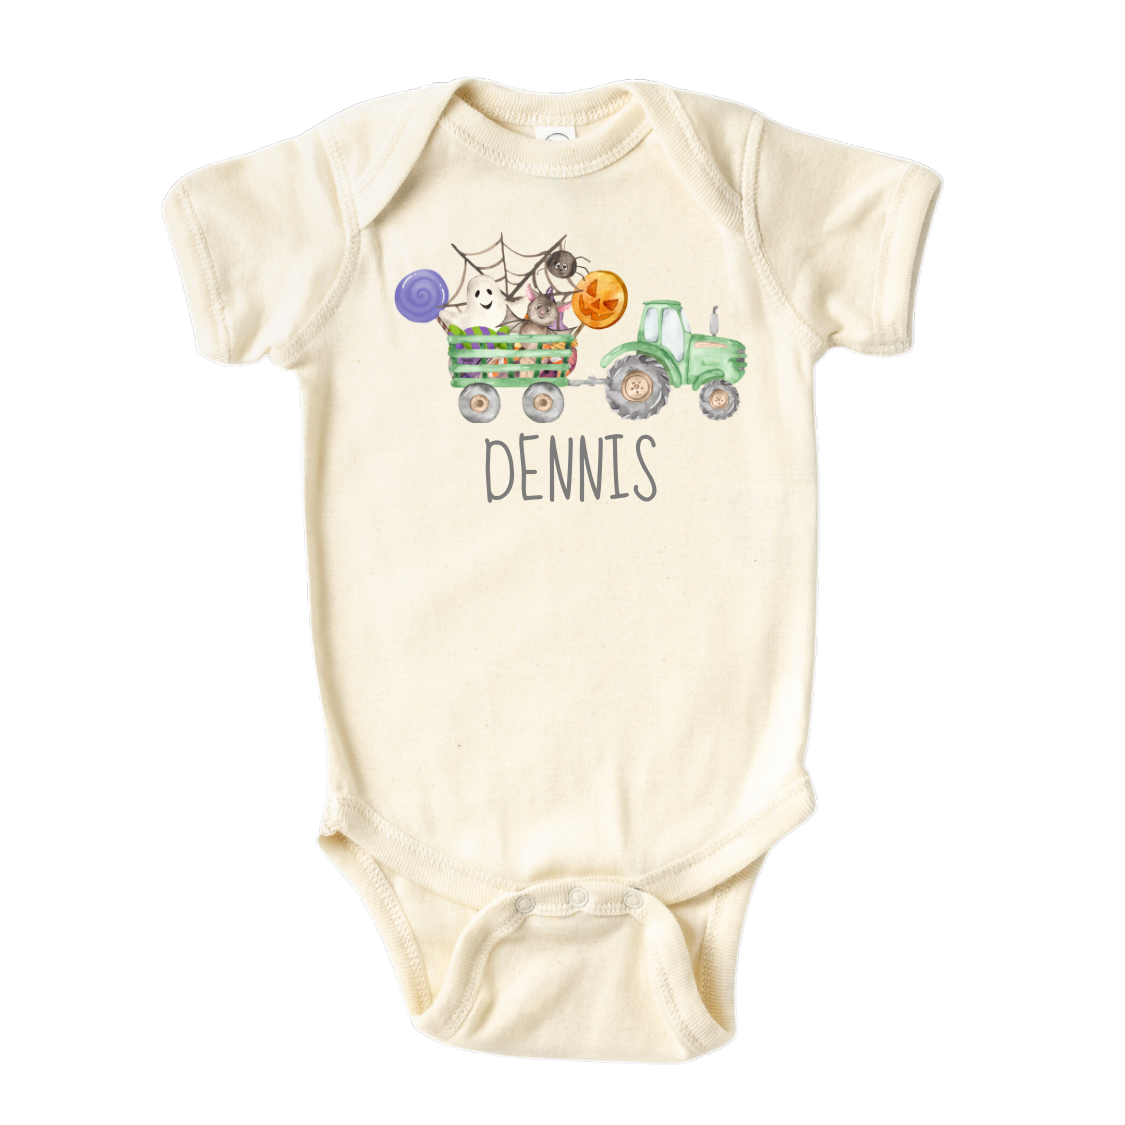 Baby Onesie - Cute Baby Onsie - Cute Baby Gift for Newborn Clothes for Baby Bodysuit with a cute Halloween truck design, customizable with names.